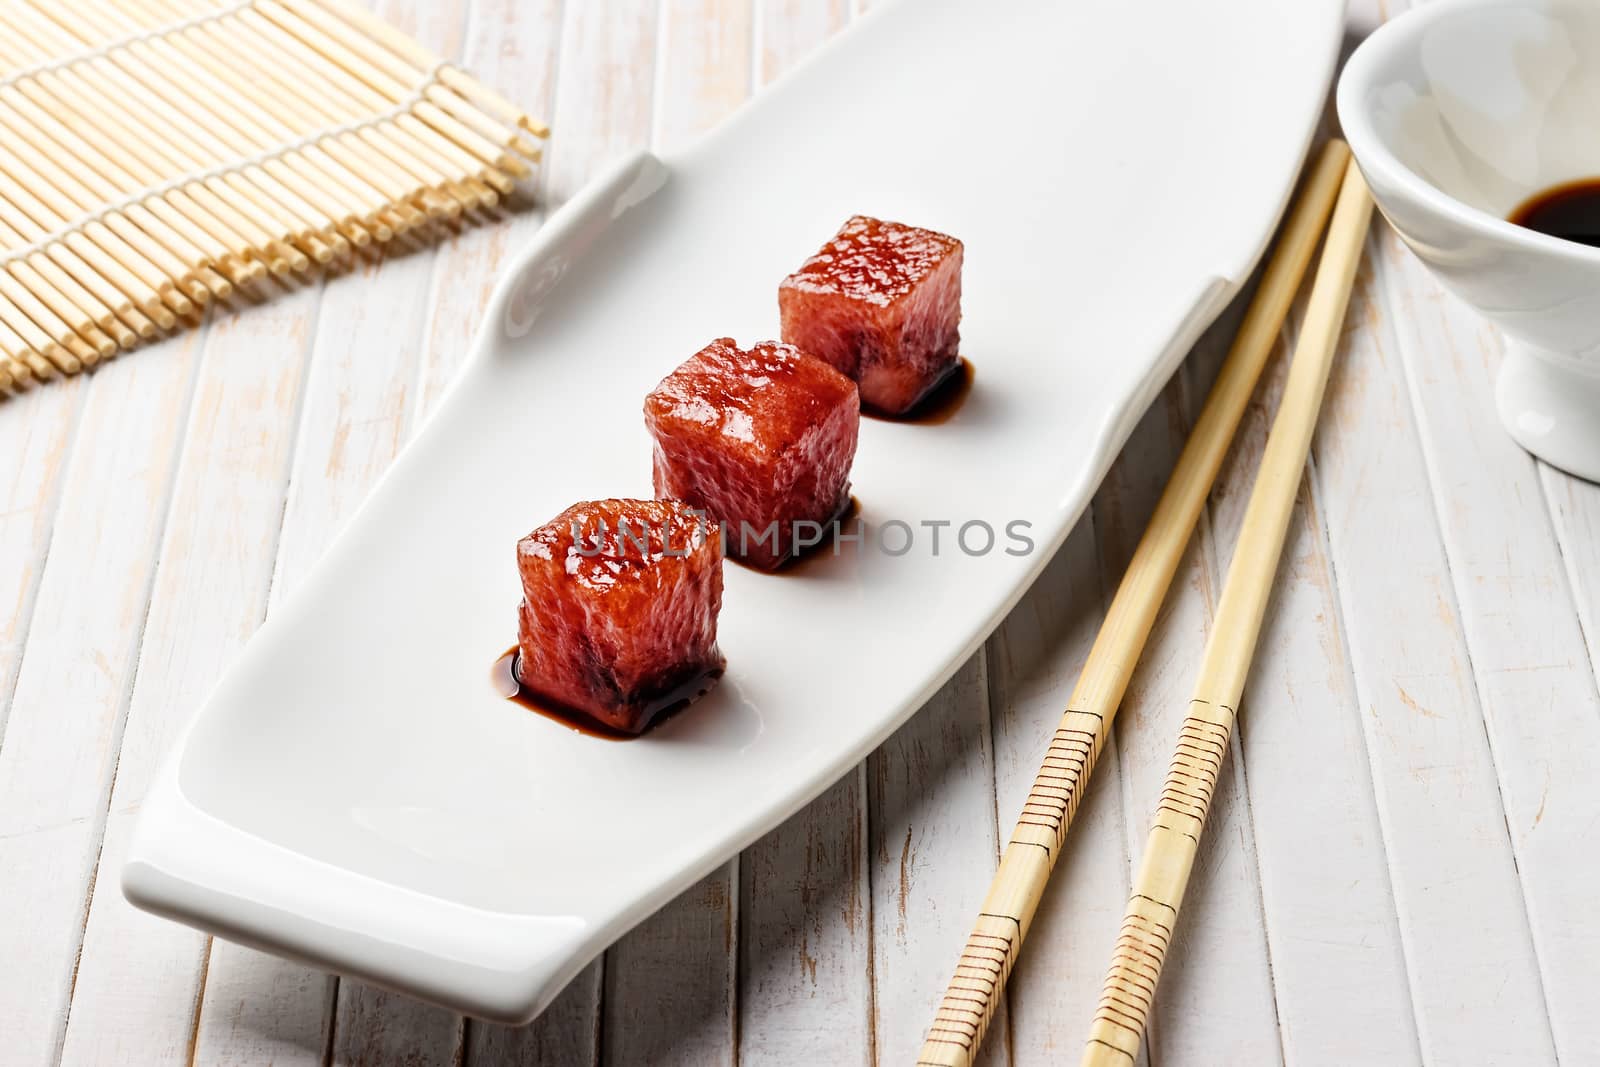 Tuna sashimi dipped in soy sauce with chopsticks and bamboo mat. Raw fish in traditional Japanese style. Horizontal image.